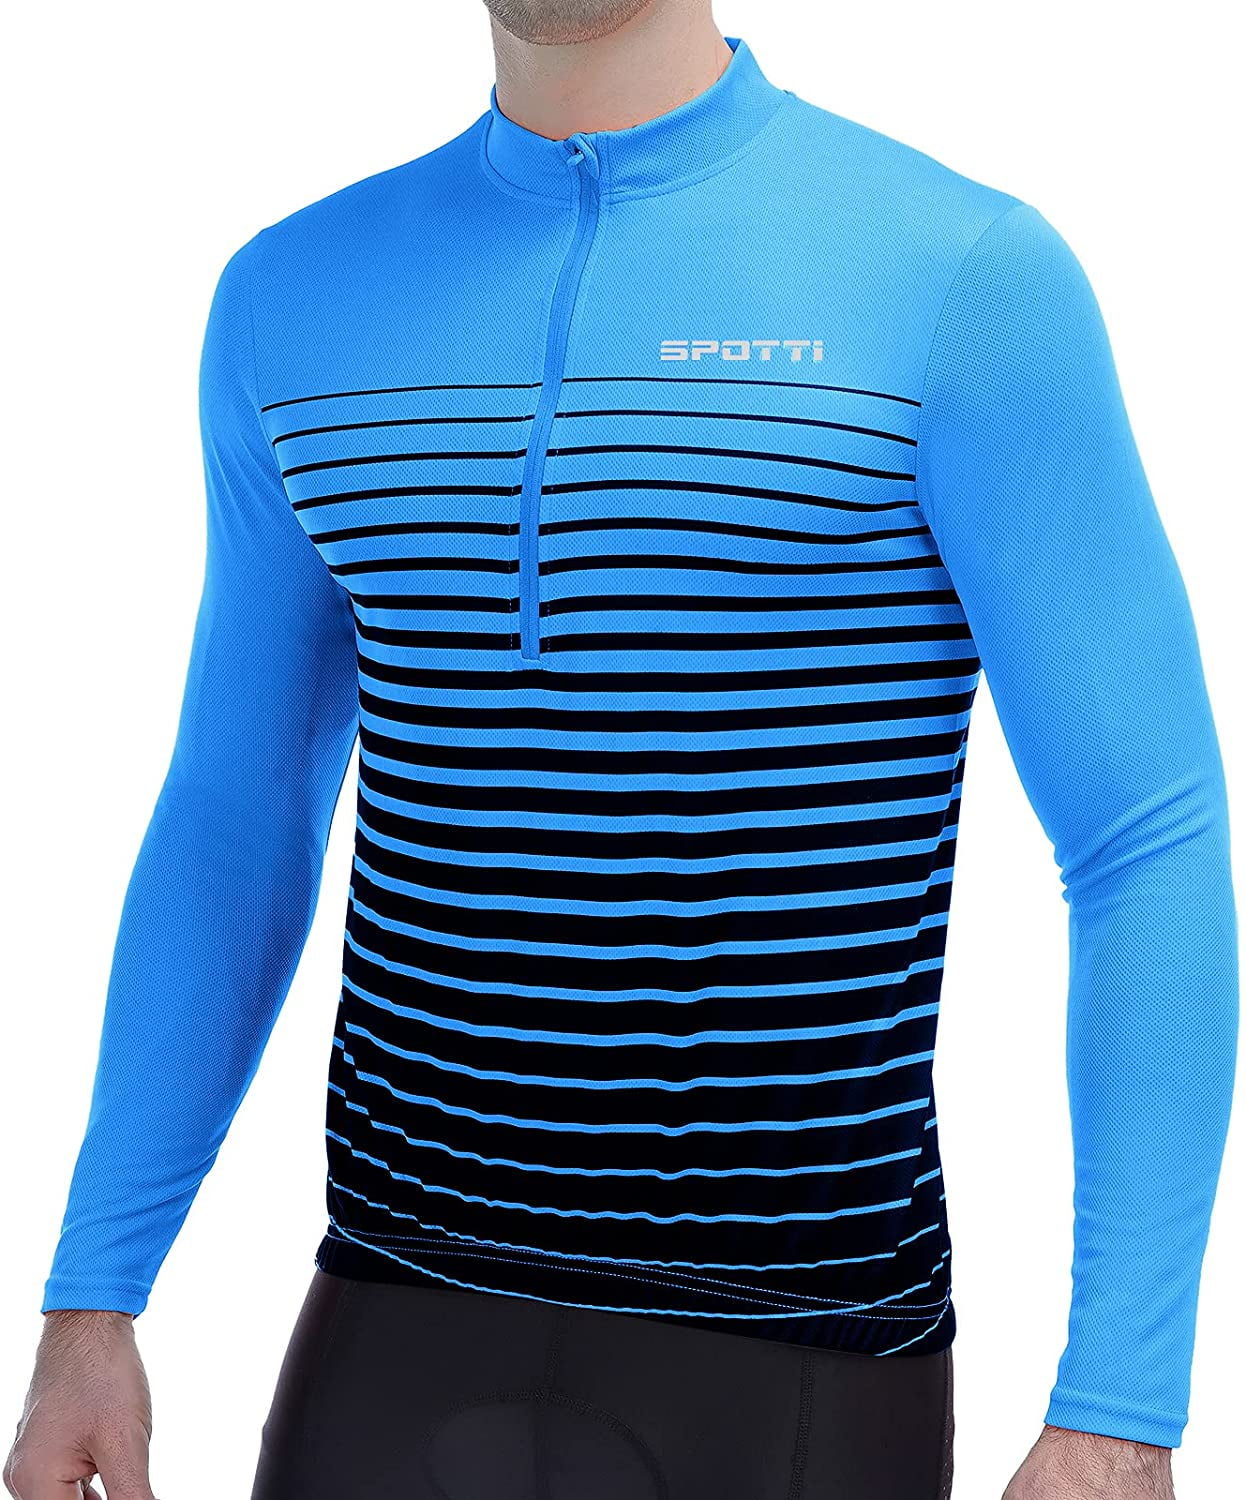 Breathable Quick Dry Biking Shirt Moisture Wicking Spotti Men's Cycling Bike Jersey Long Sleeve with 3 Rear Pockets 